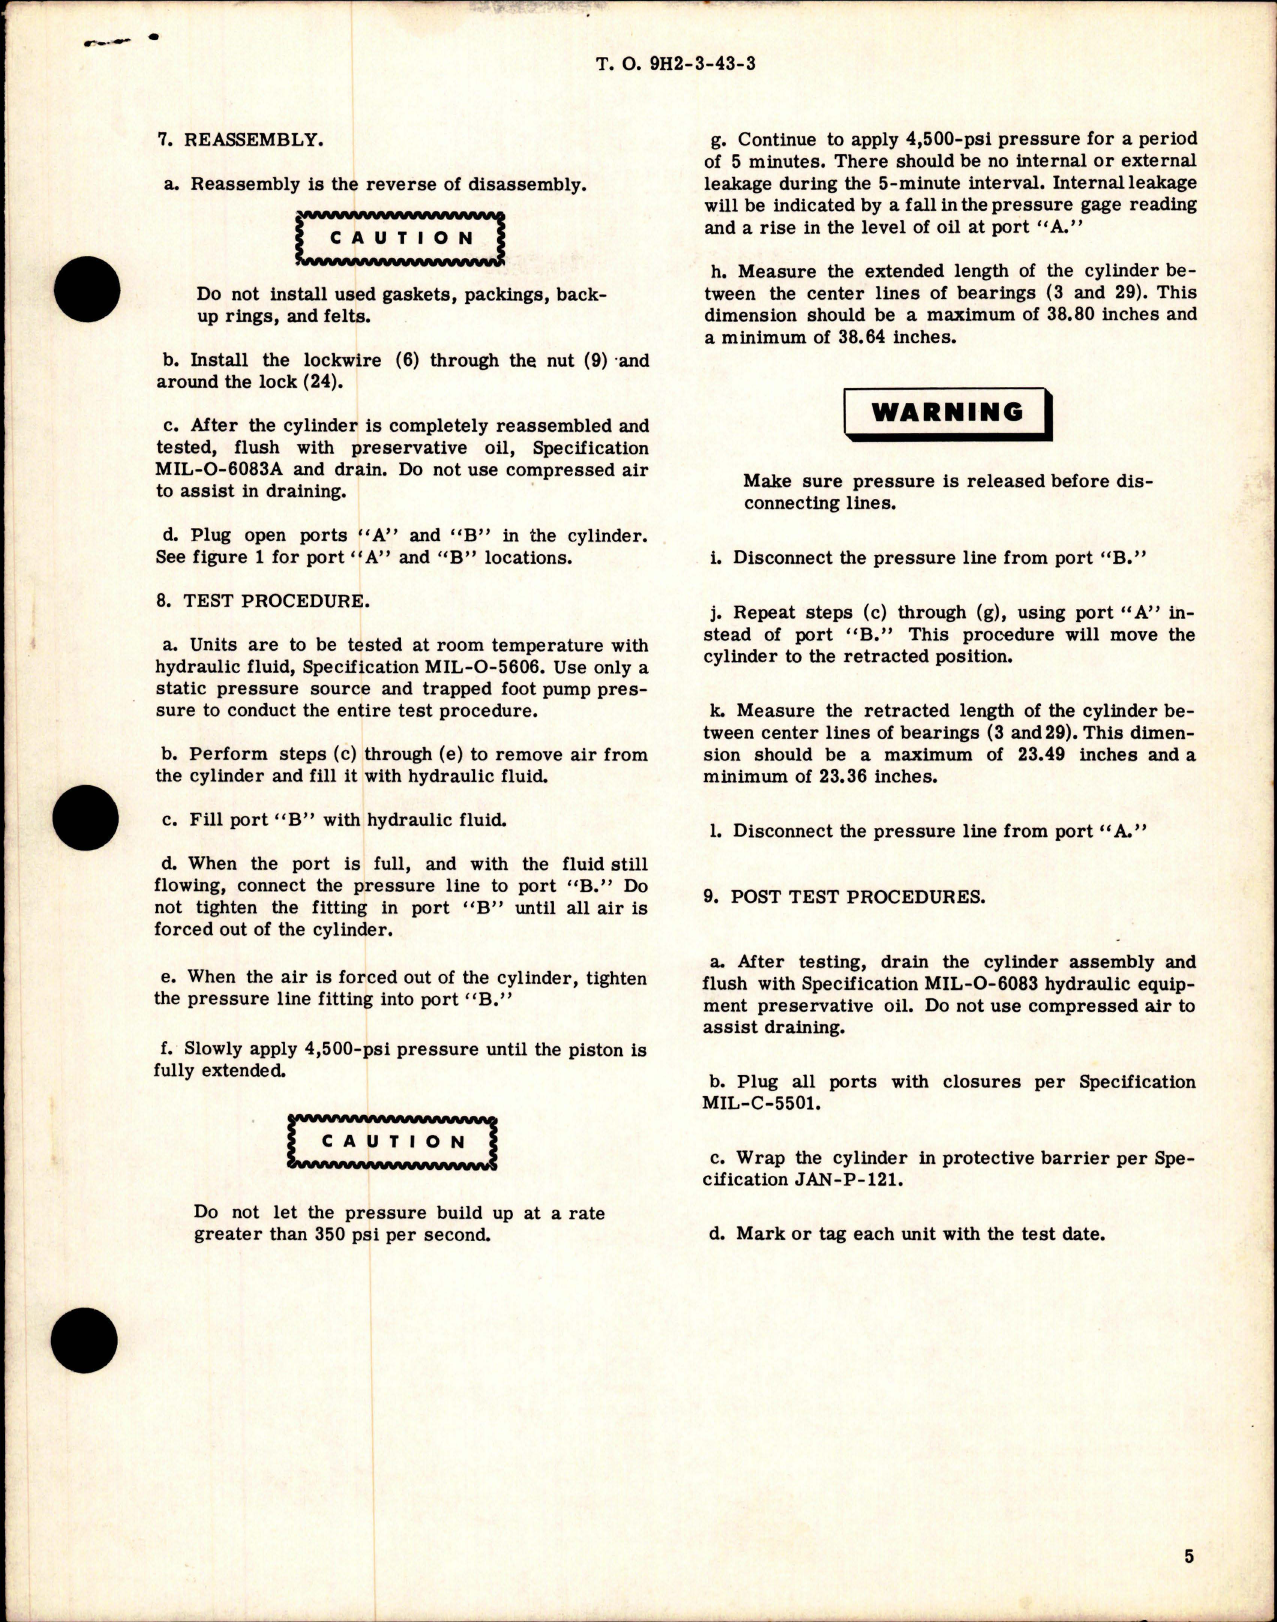 Sample page 5 from AirCorps Library document: Overhaul Instructions with Parts for Cylinder Assembly Actuating Nose Landing Gear  - 372682-1